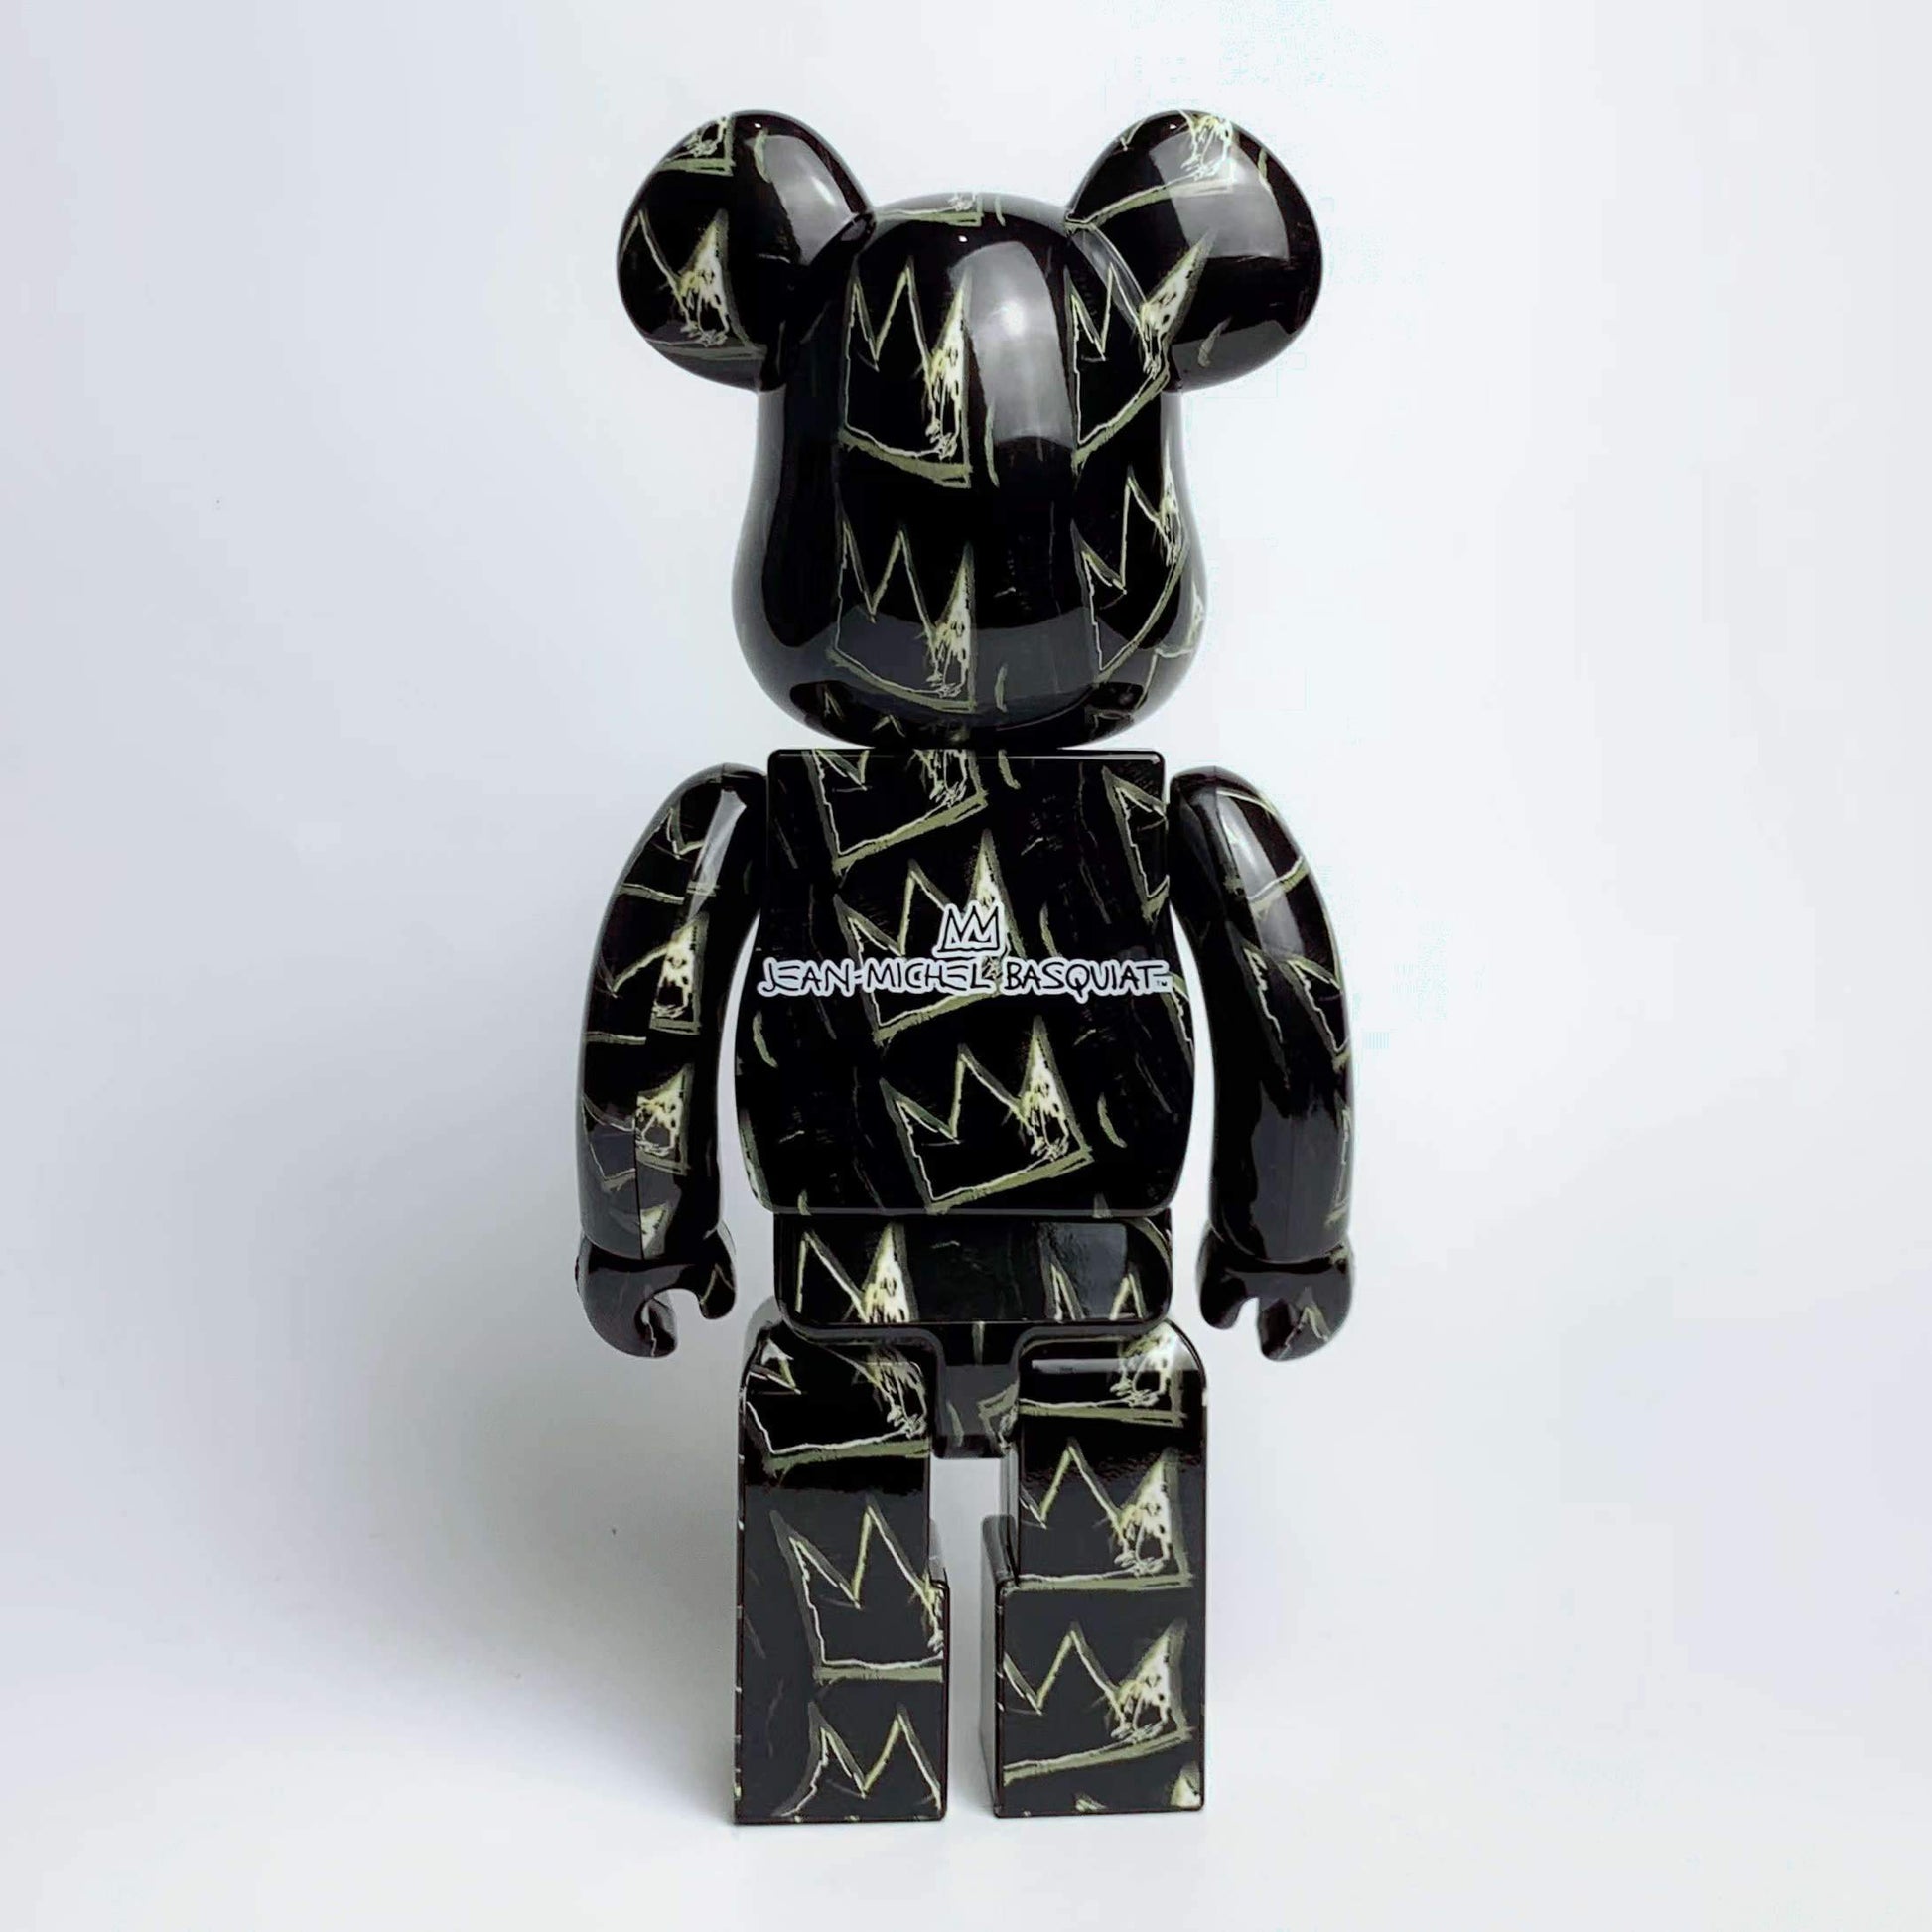 28cm BEARBRICK 400% Baquist 8th Generation Robot ABS Action Figure Boxed-FuGui Tide play